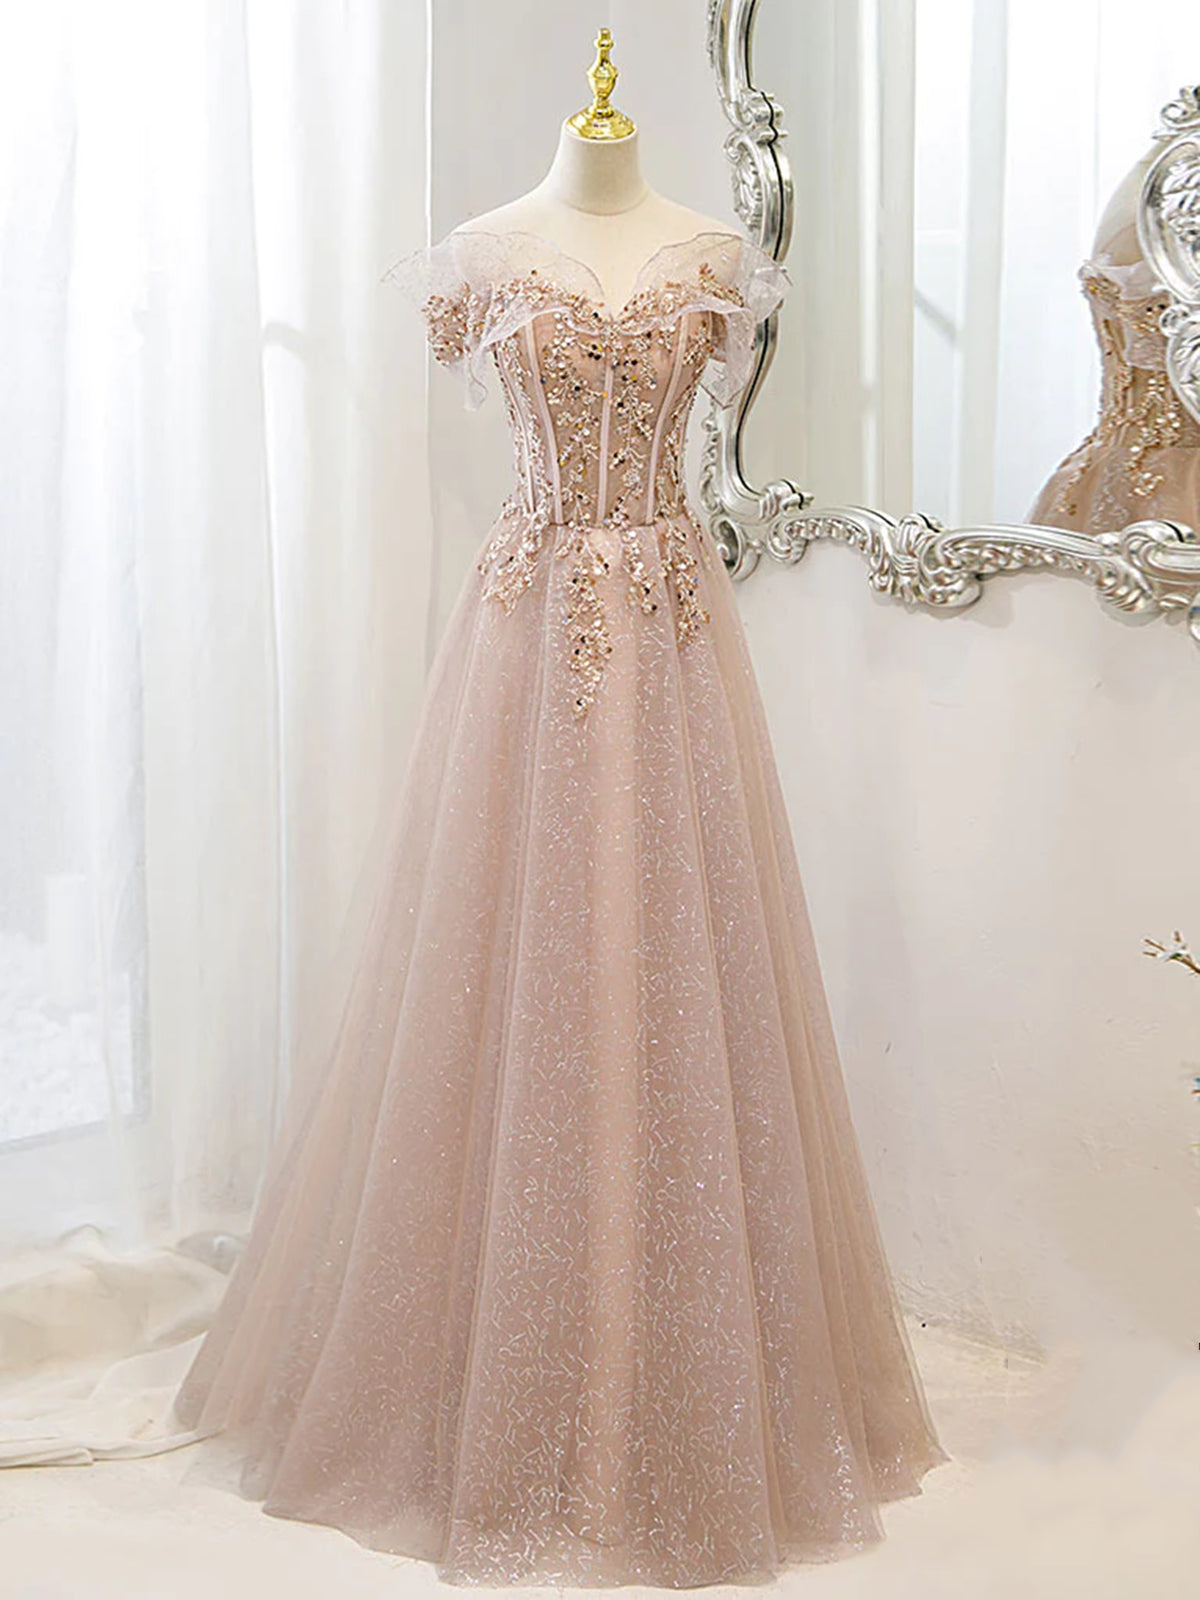 Off the Shoulder Champagne Tulle Lace Prom Dress, Off Shoulder Champagne Lace Formal Dress